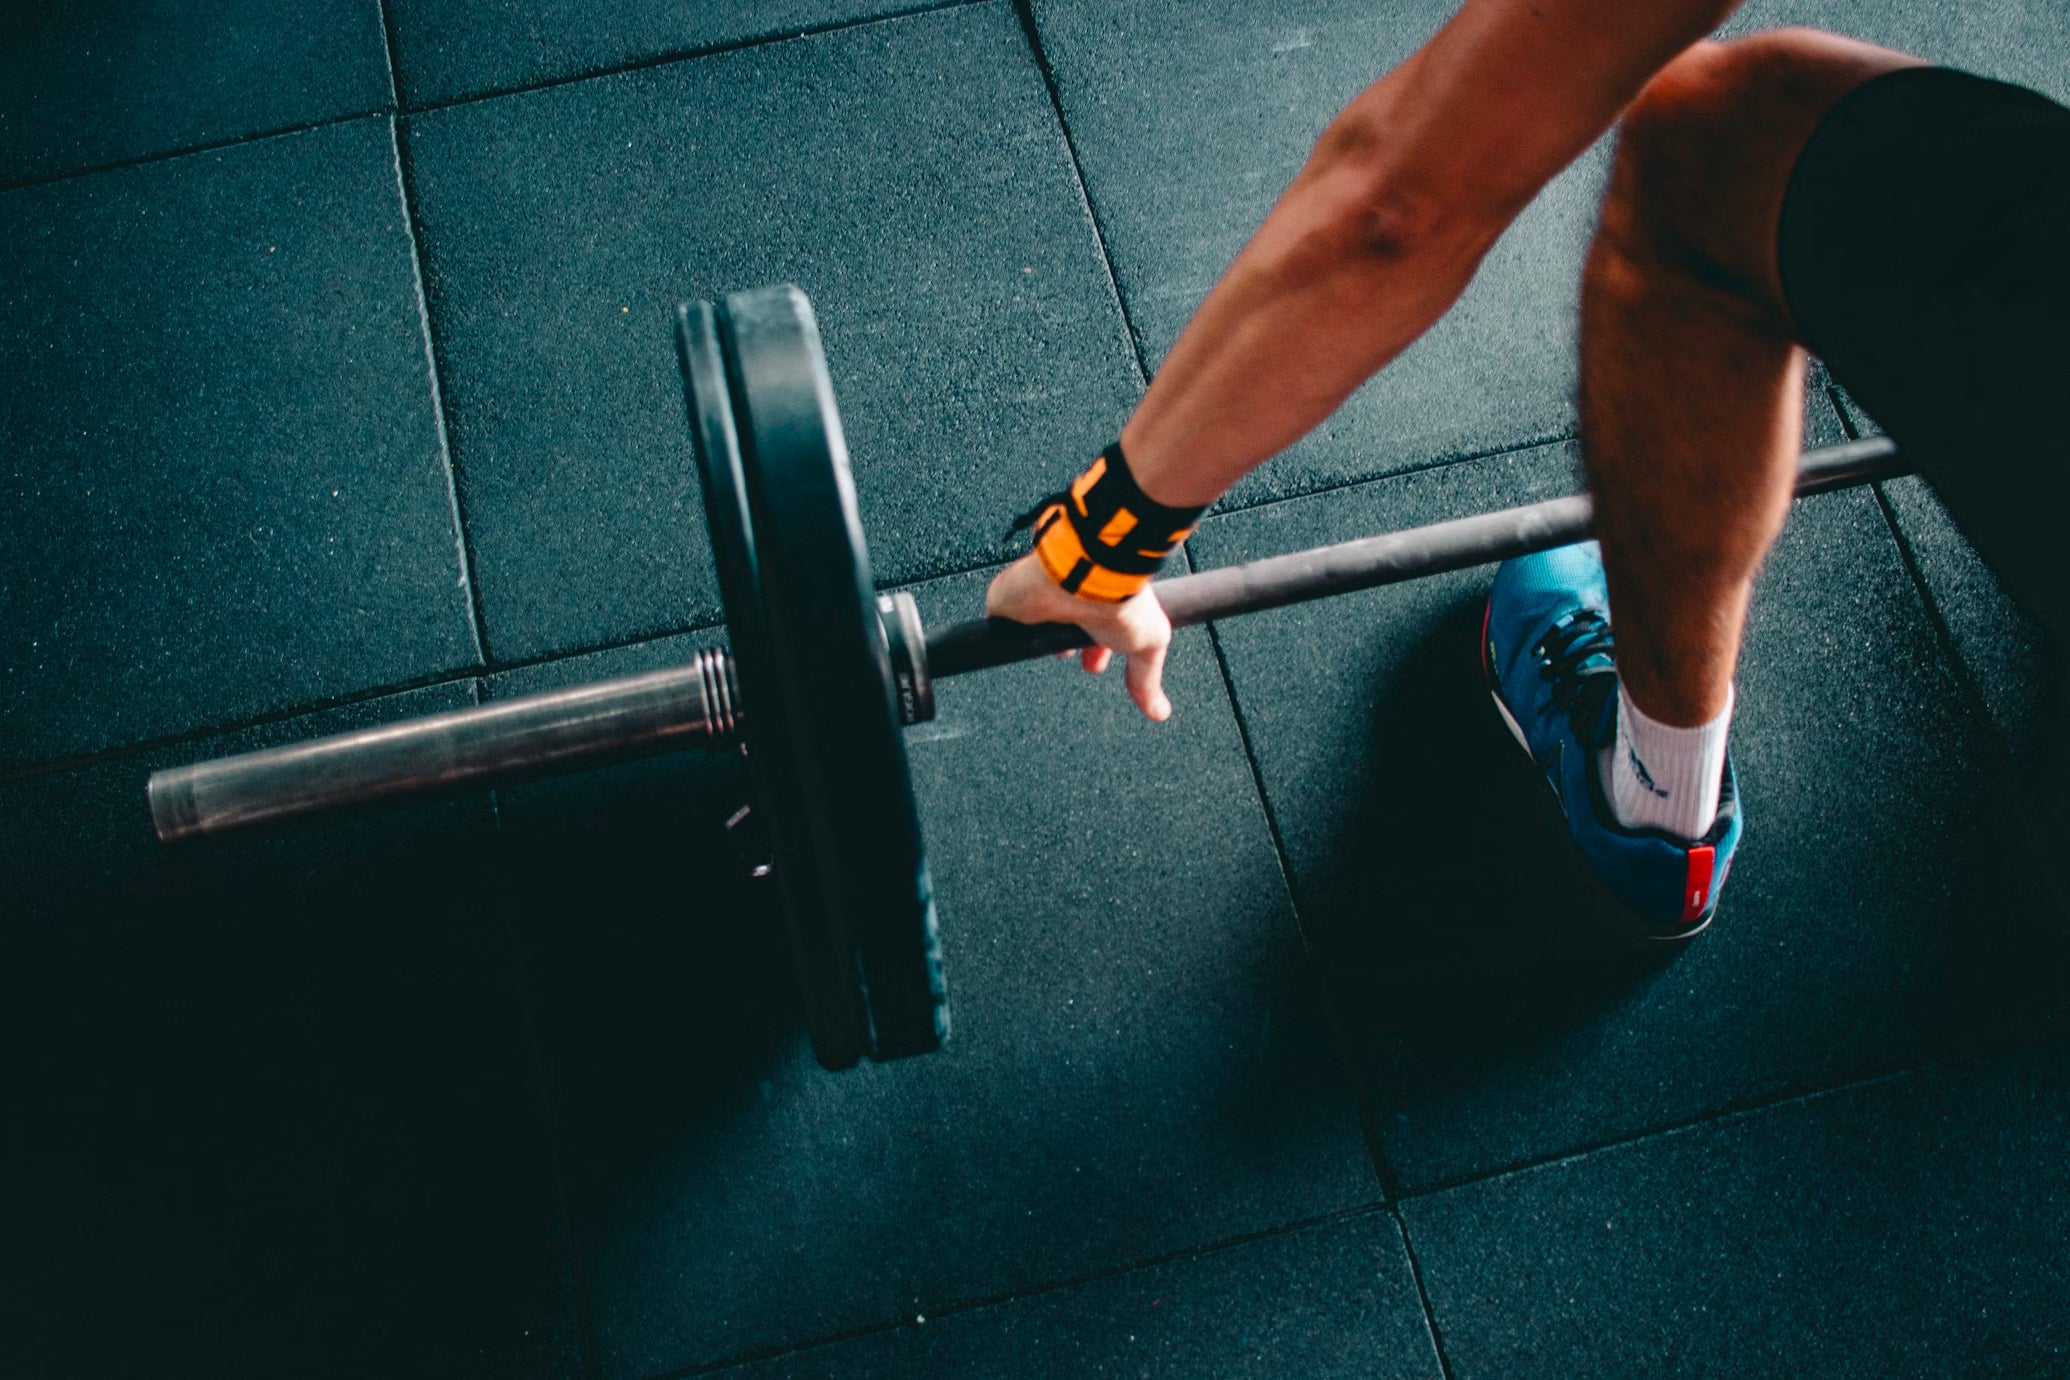 How To Keep Motivated For Your Next Workout Or Lifting Session